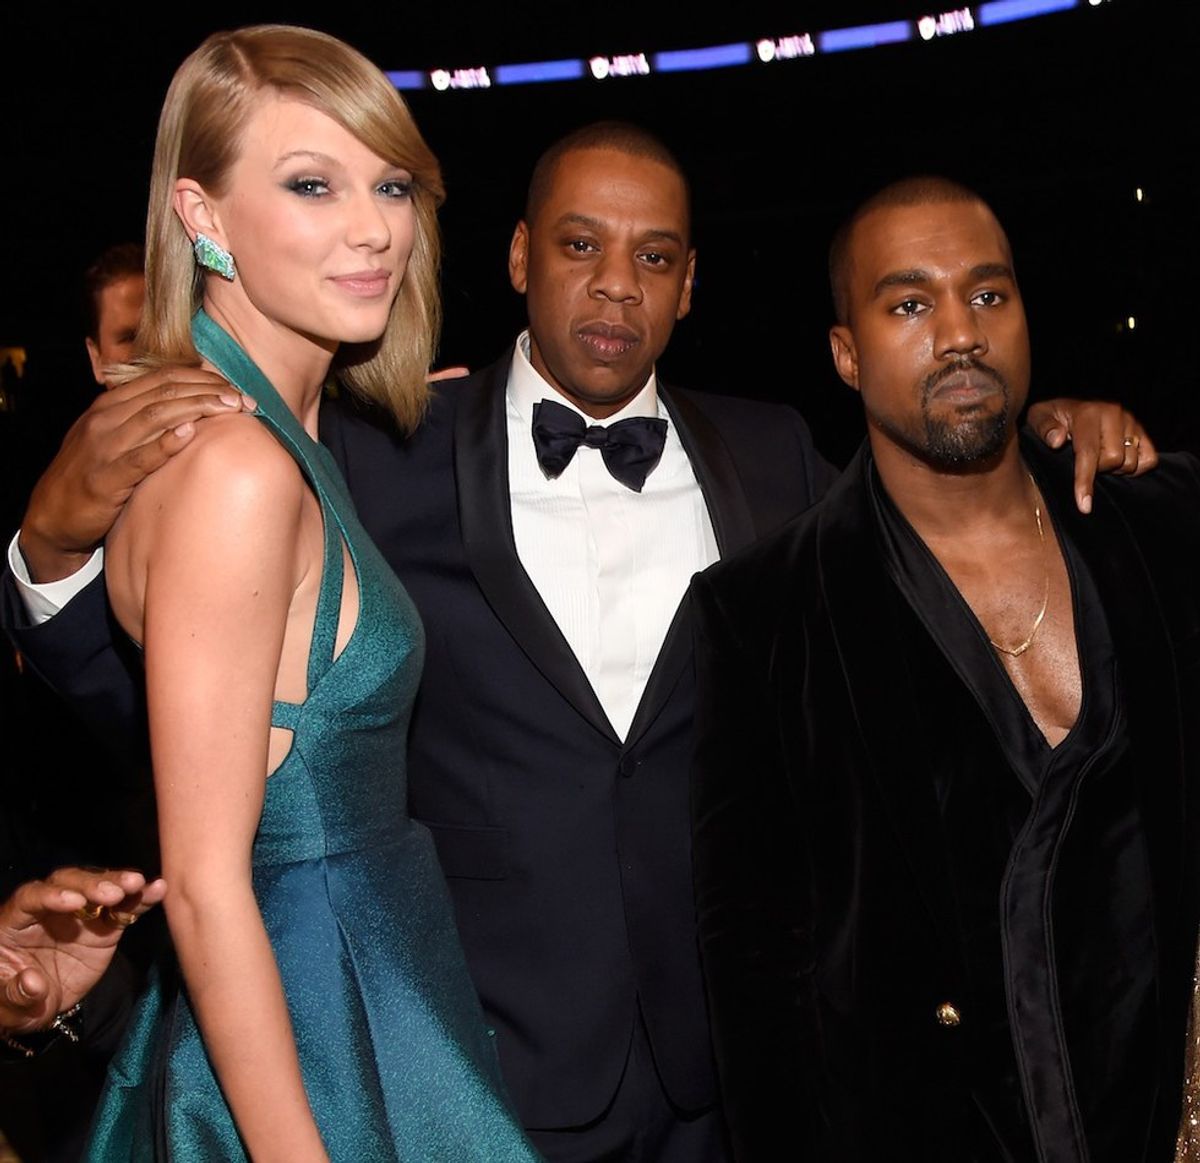 Why The Feud Between Kim, Kanye And Taylor Is Bad For Women